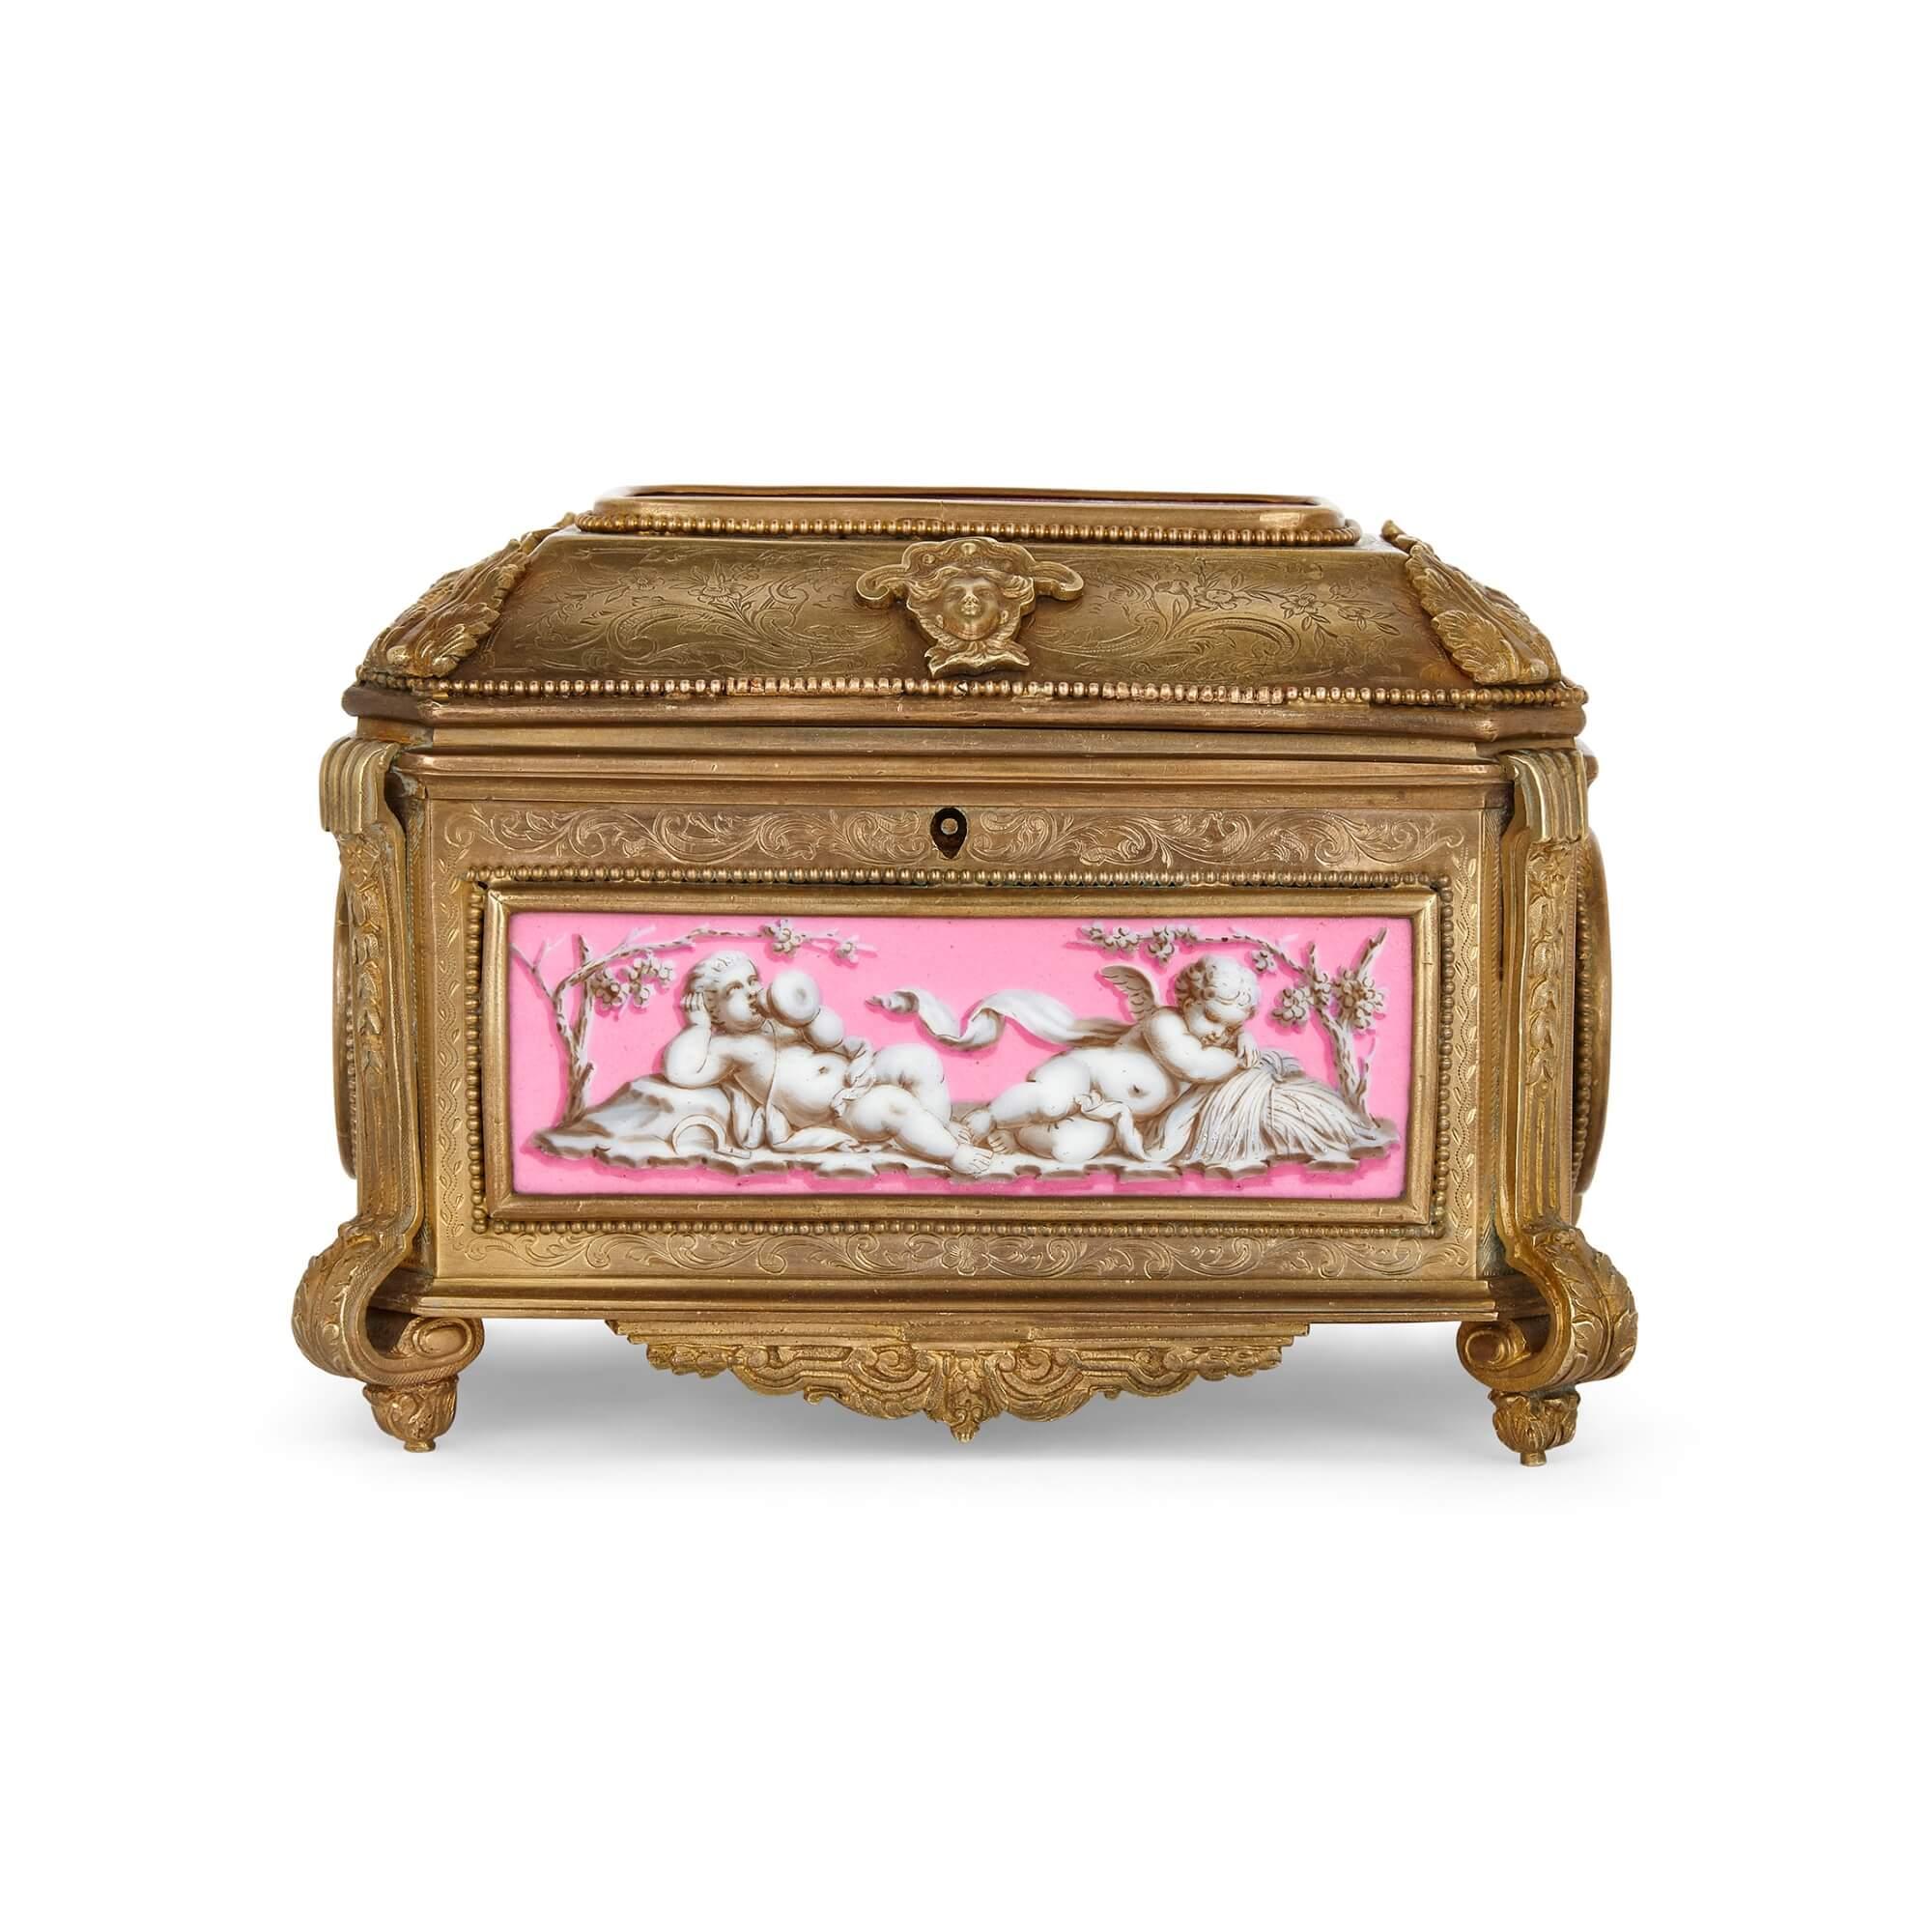 19th Century French Gilt Bronze and Pink Porcelain Jewellery Box by Tahan For Sale